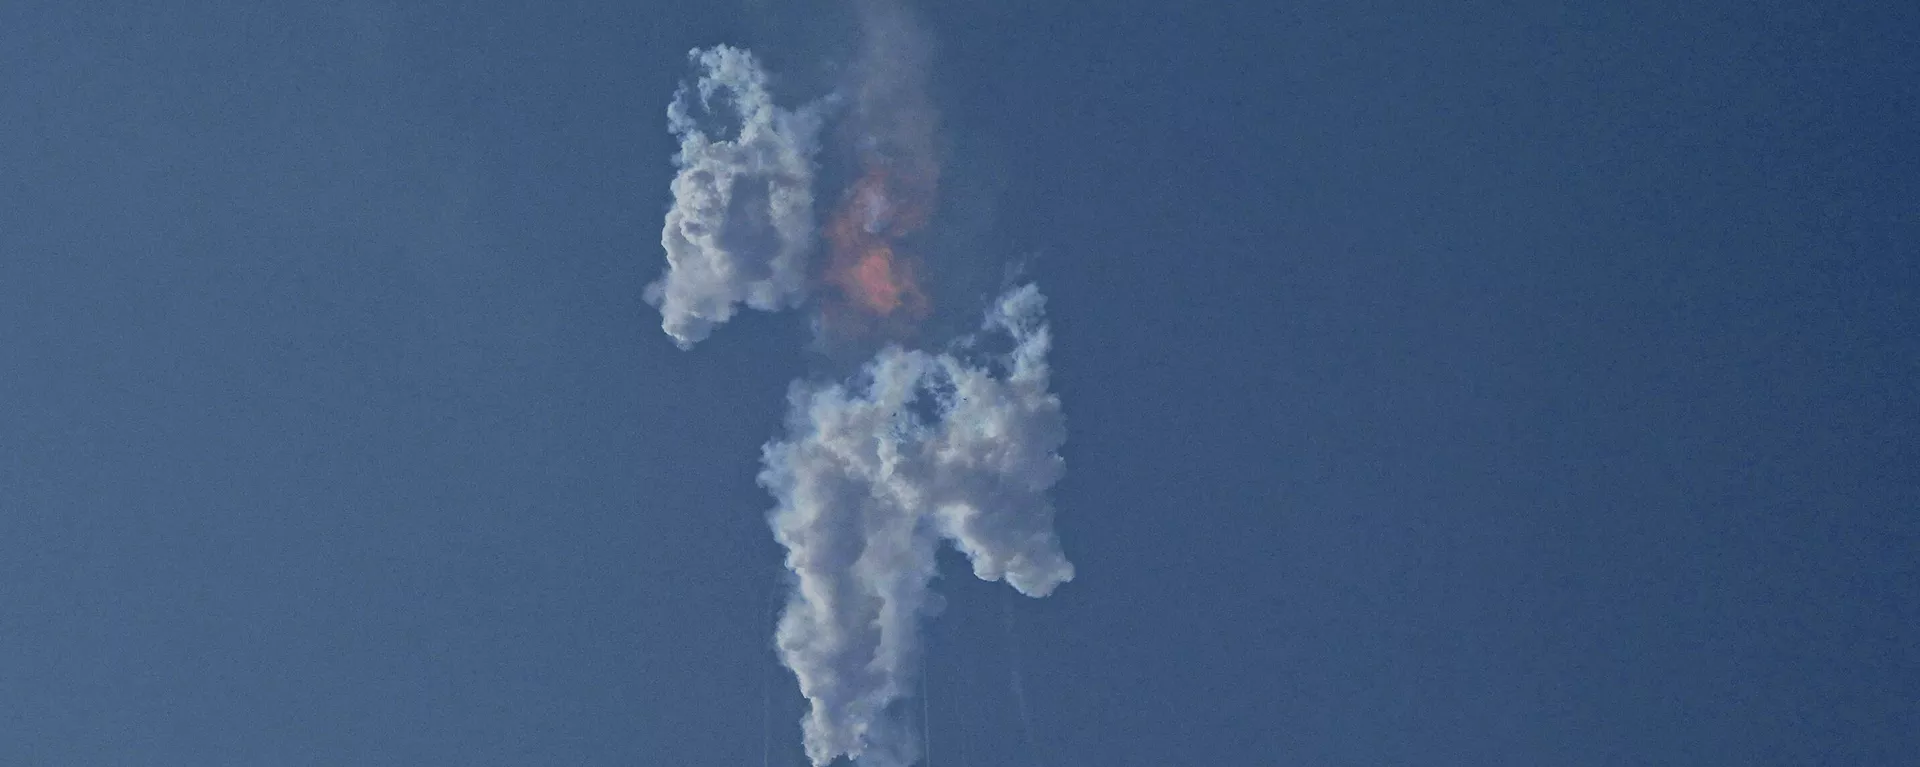 SpaceX's Starship launches from Starbase in Boca Chica, Texas, Thursday, April 20, 2023. The giant new rocket exploded minutes after blasting off on it first test flight and crashed into the Gulf of Mexico. - Sputnik International, 1920, 20.04.2023